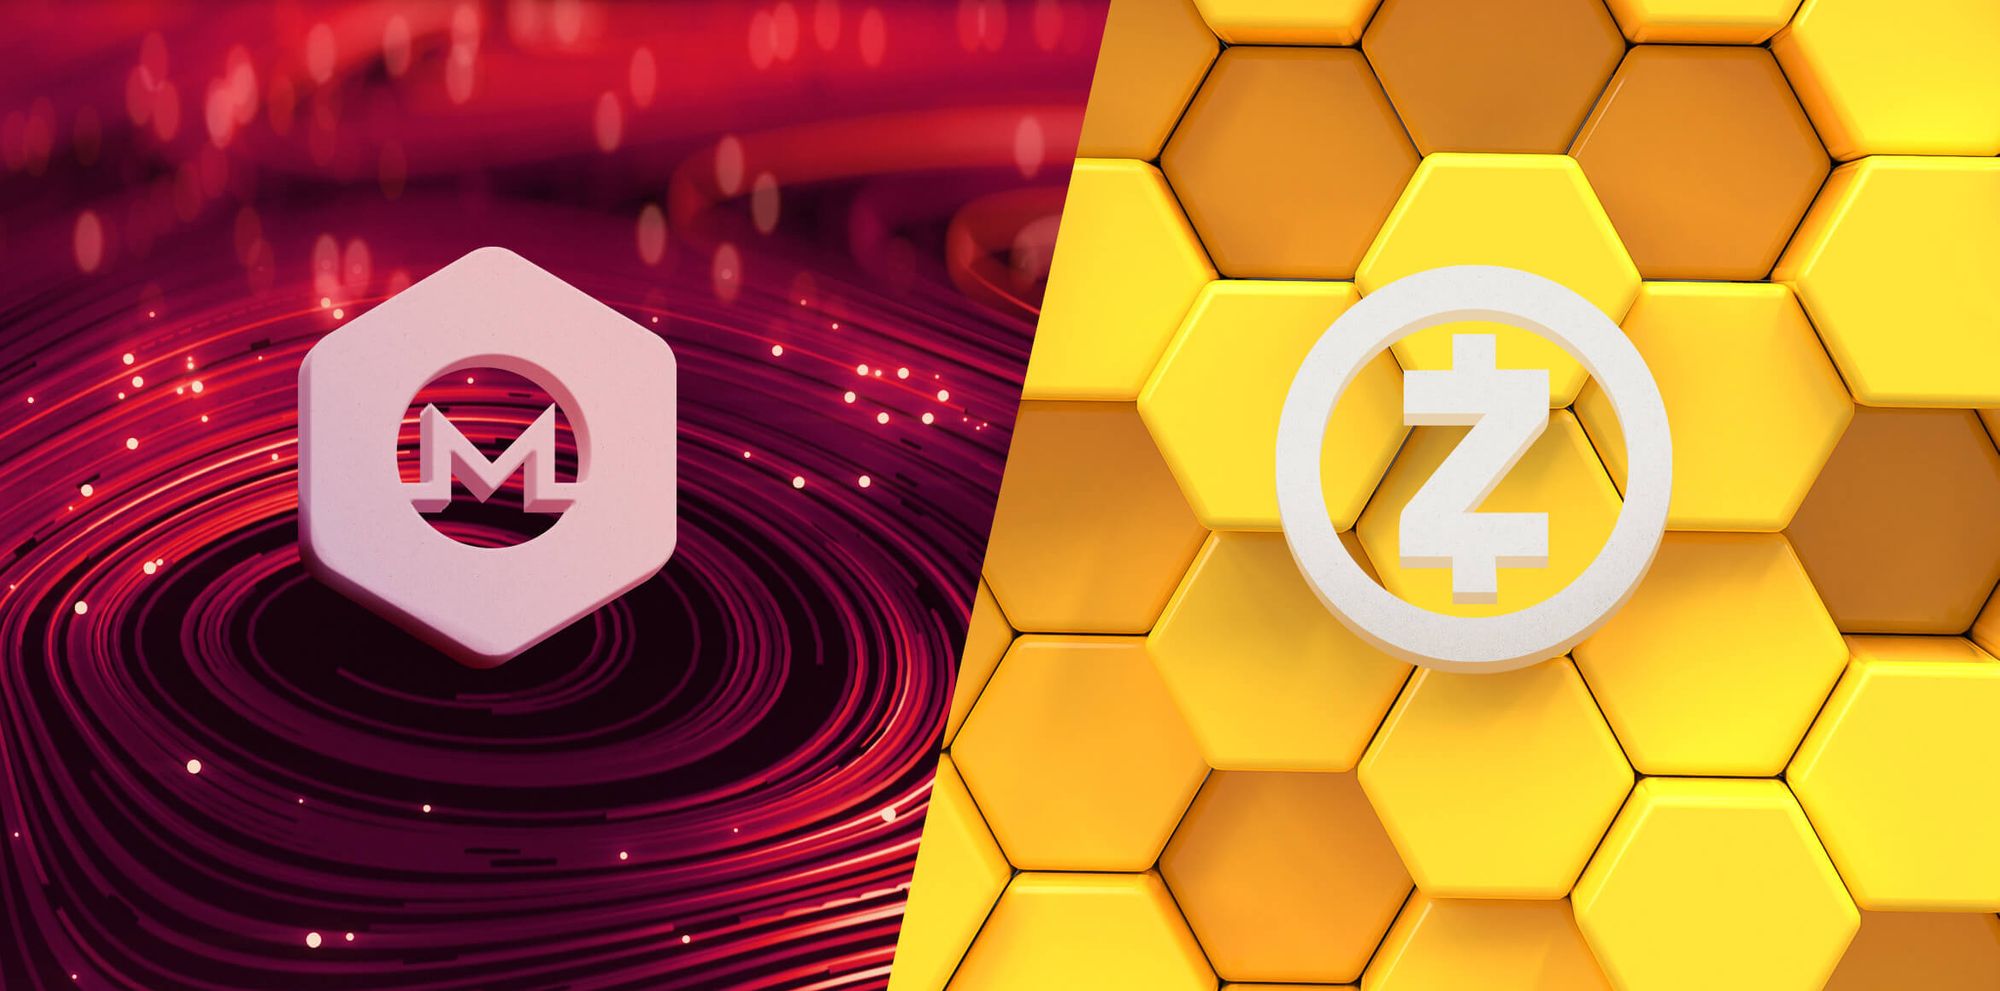 ZCash and Monero - 10 Key Aspects of Privacy Coins You Should Know